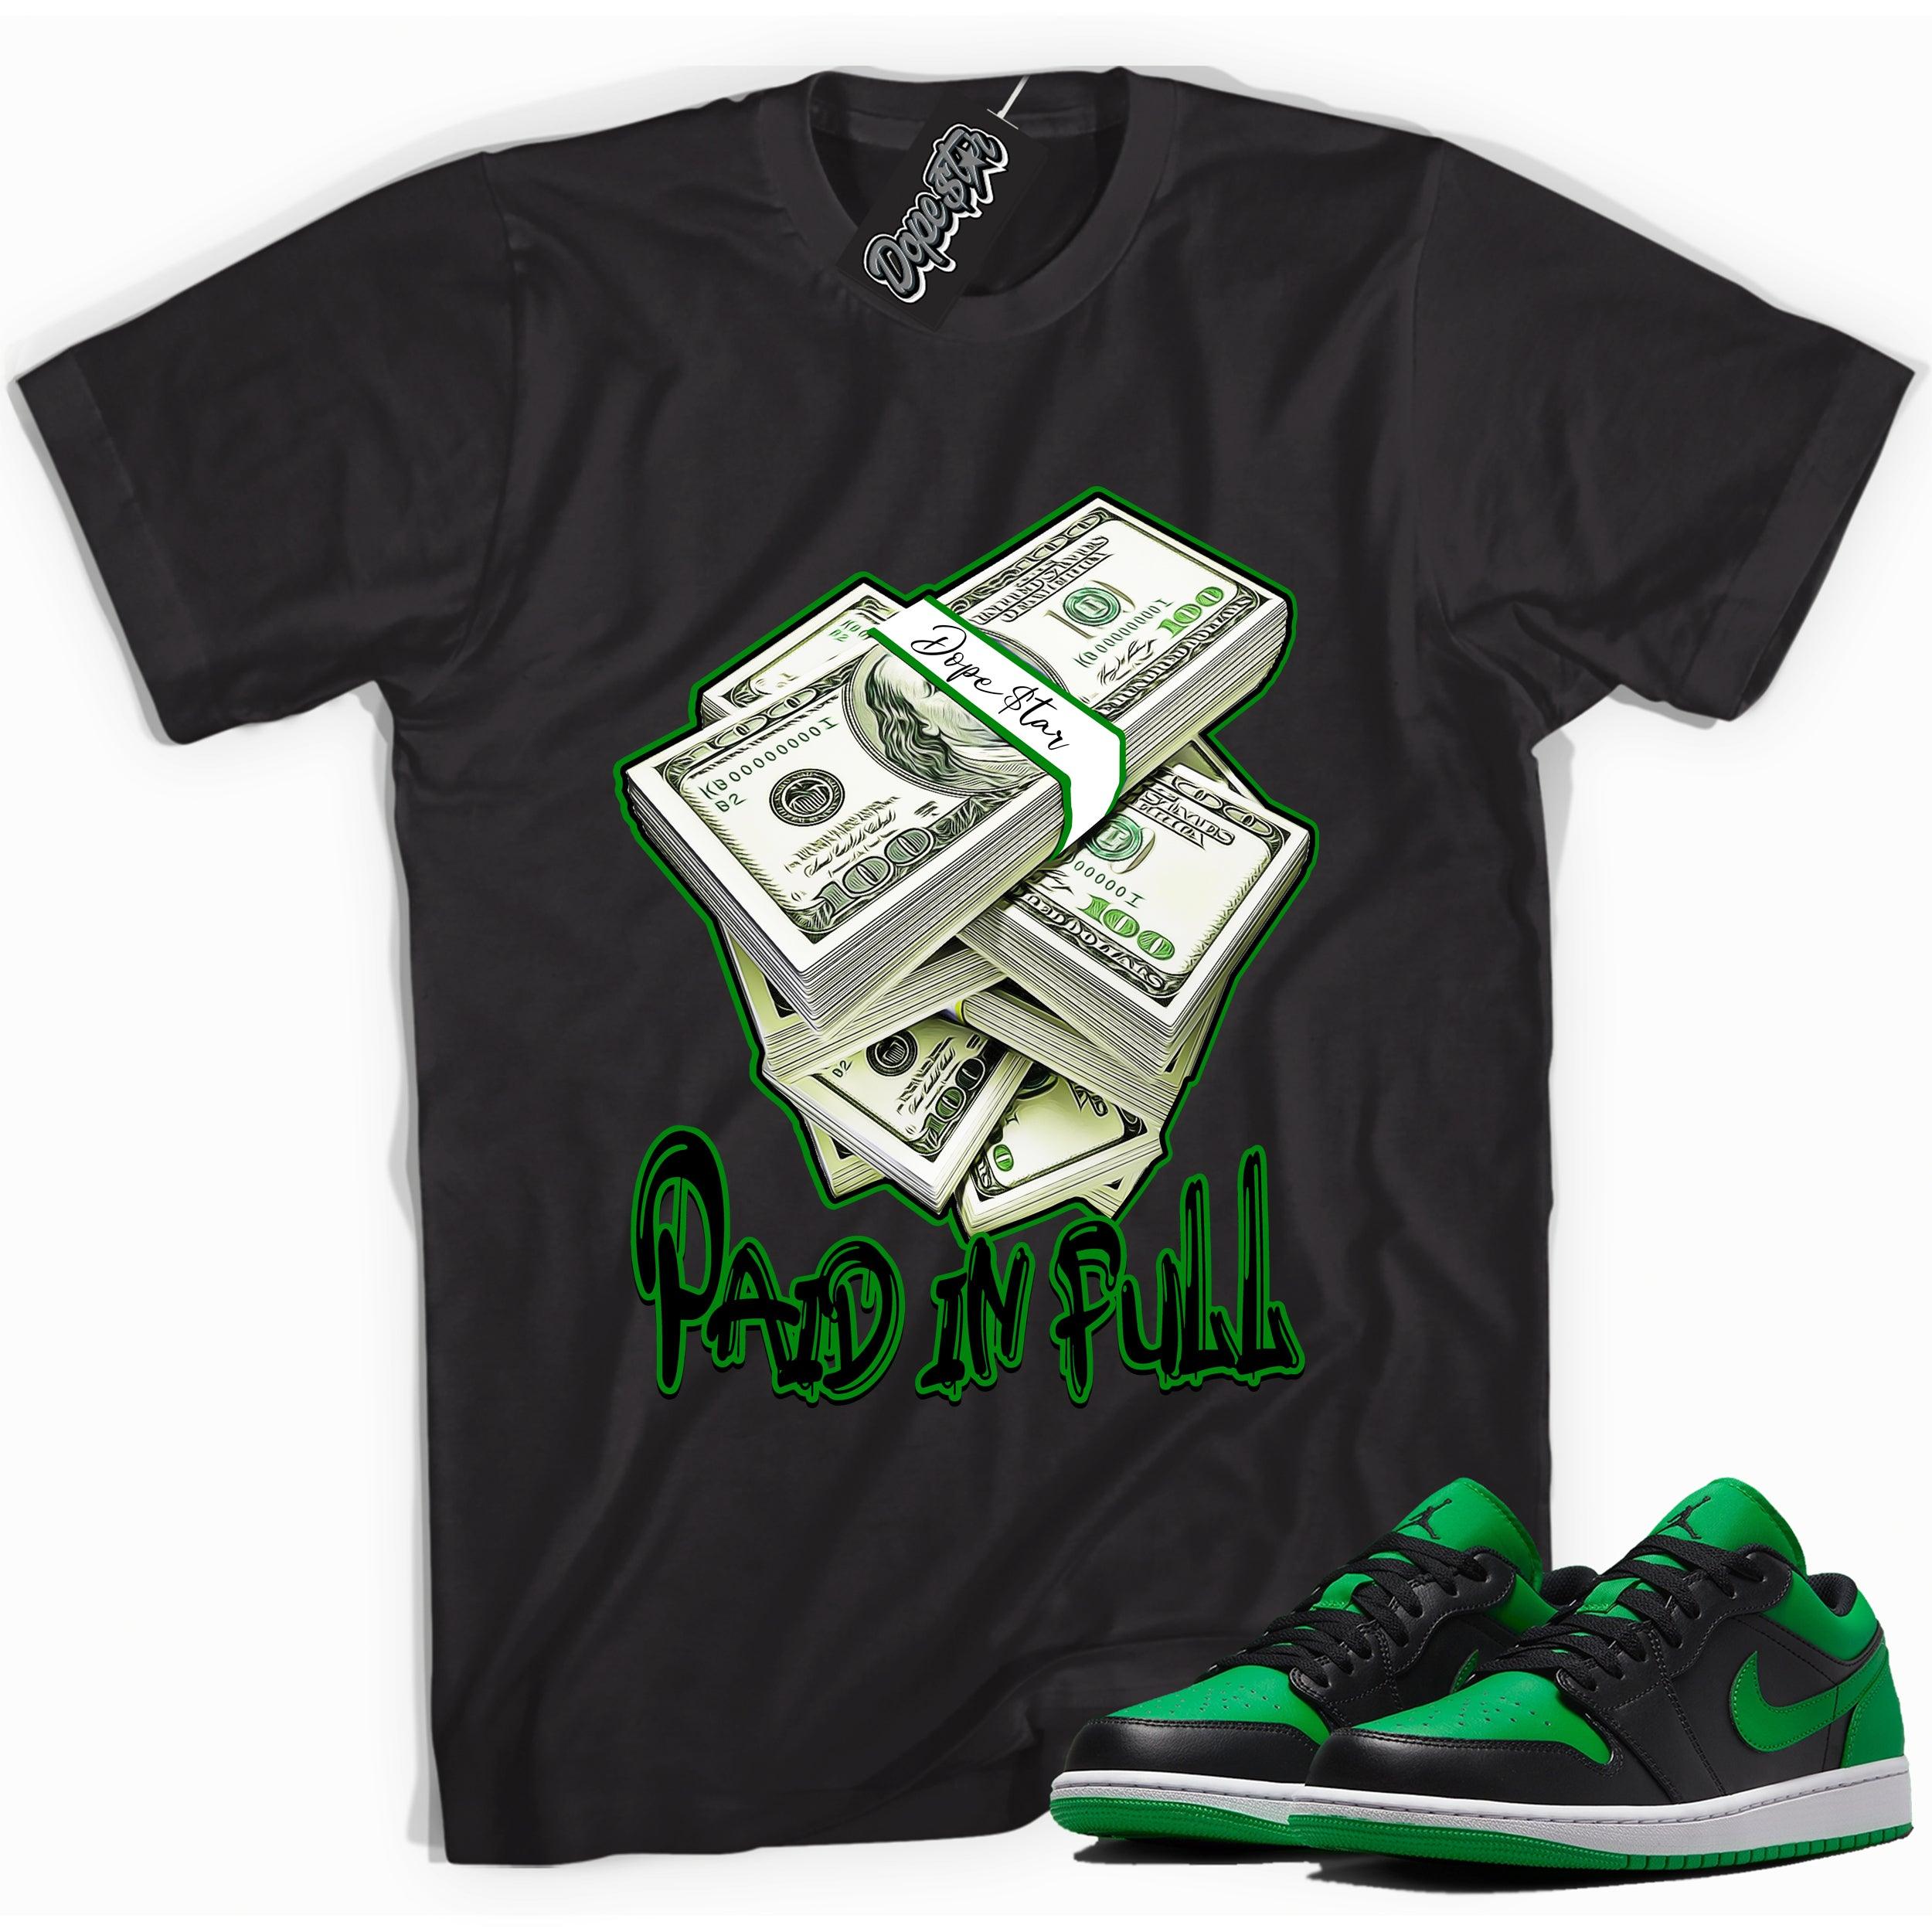 Cool black graphic tee with 'Paid In Full' print, that perfectly matches Air Jordan 1 Low Lucky Green sneakers